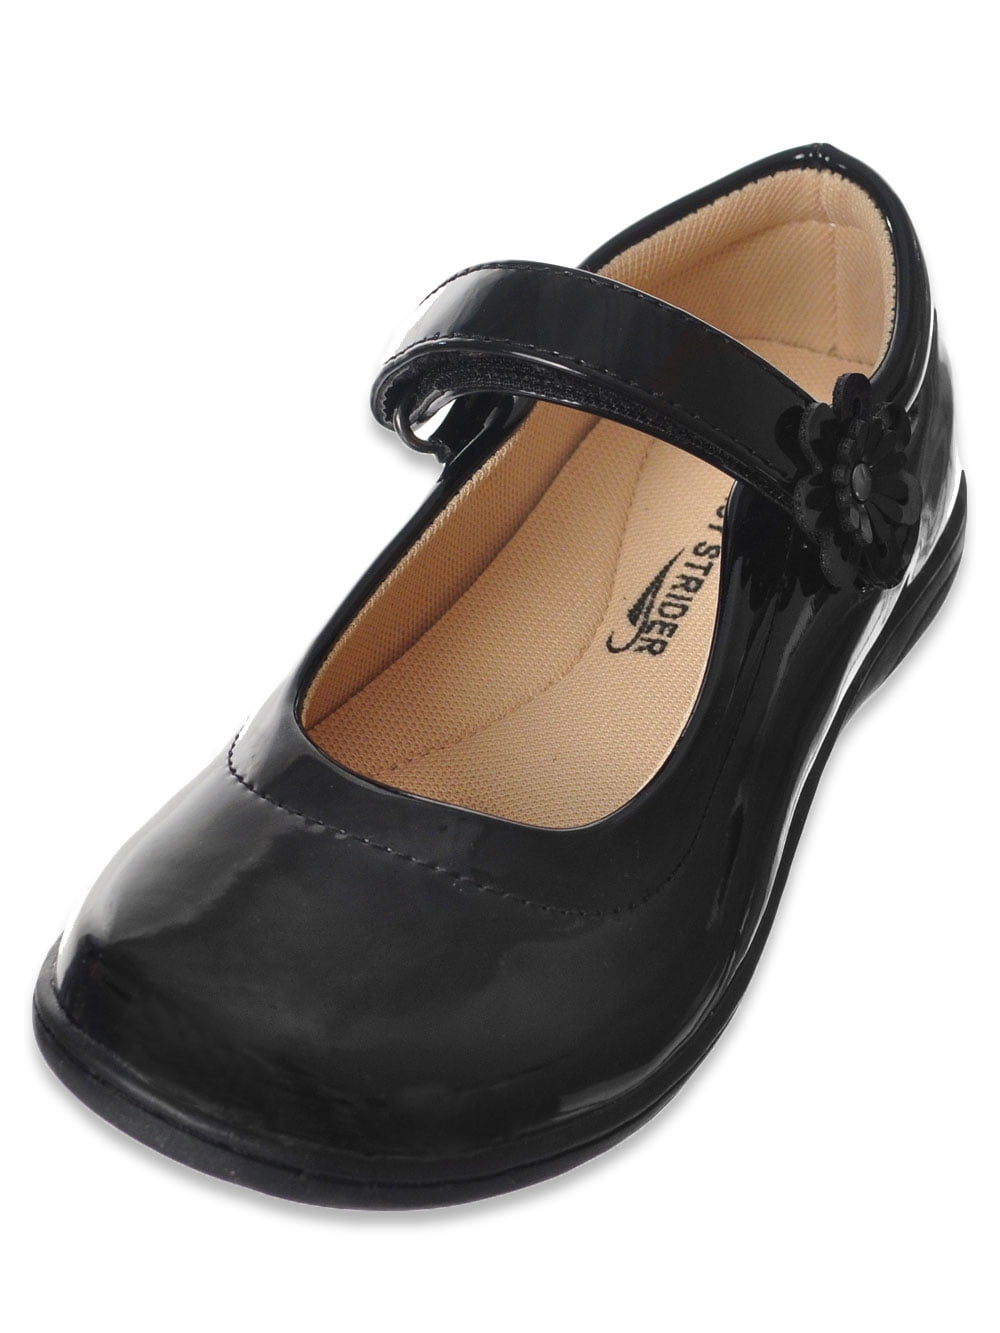 Easy Strider Girls' Mary Jane Shoes 